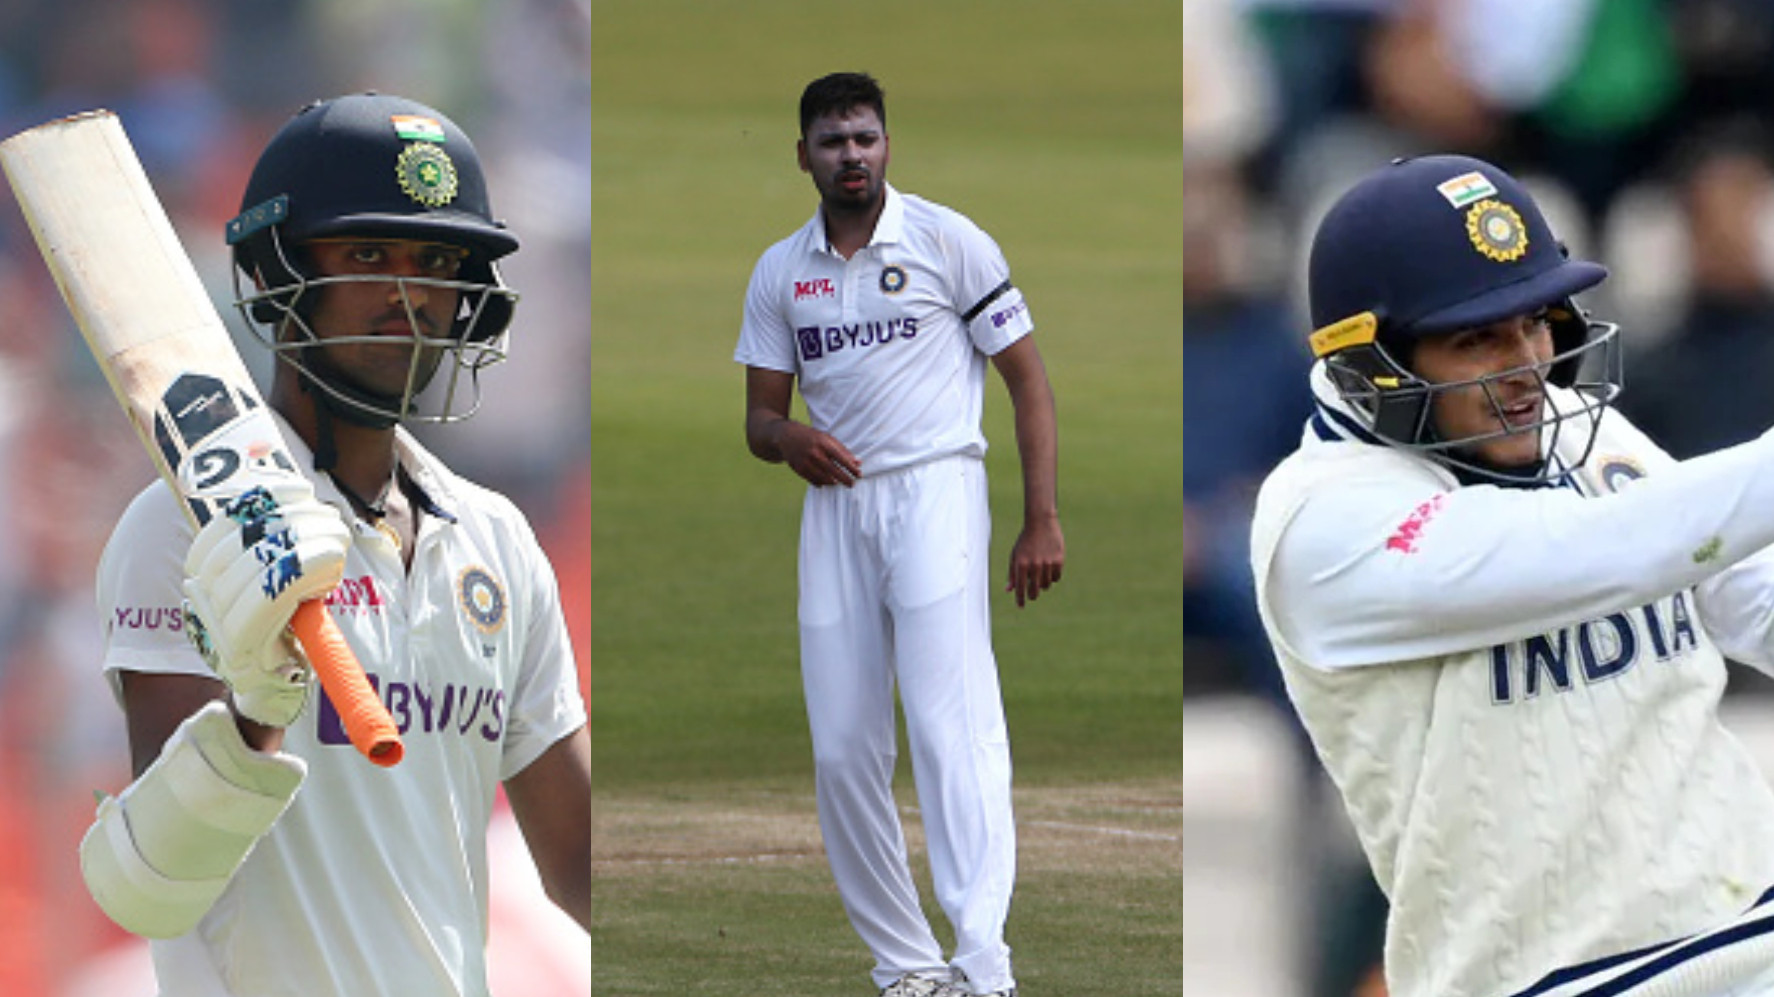 ENG v IND 2021: 3 ideal replacements for India in place of Shubman Gill, Avesh Khan and Washington Sundar